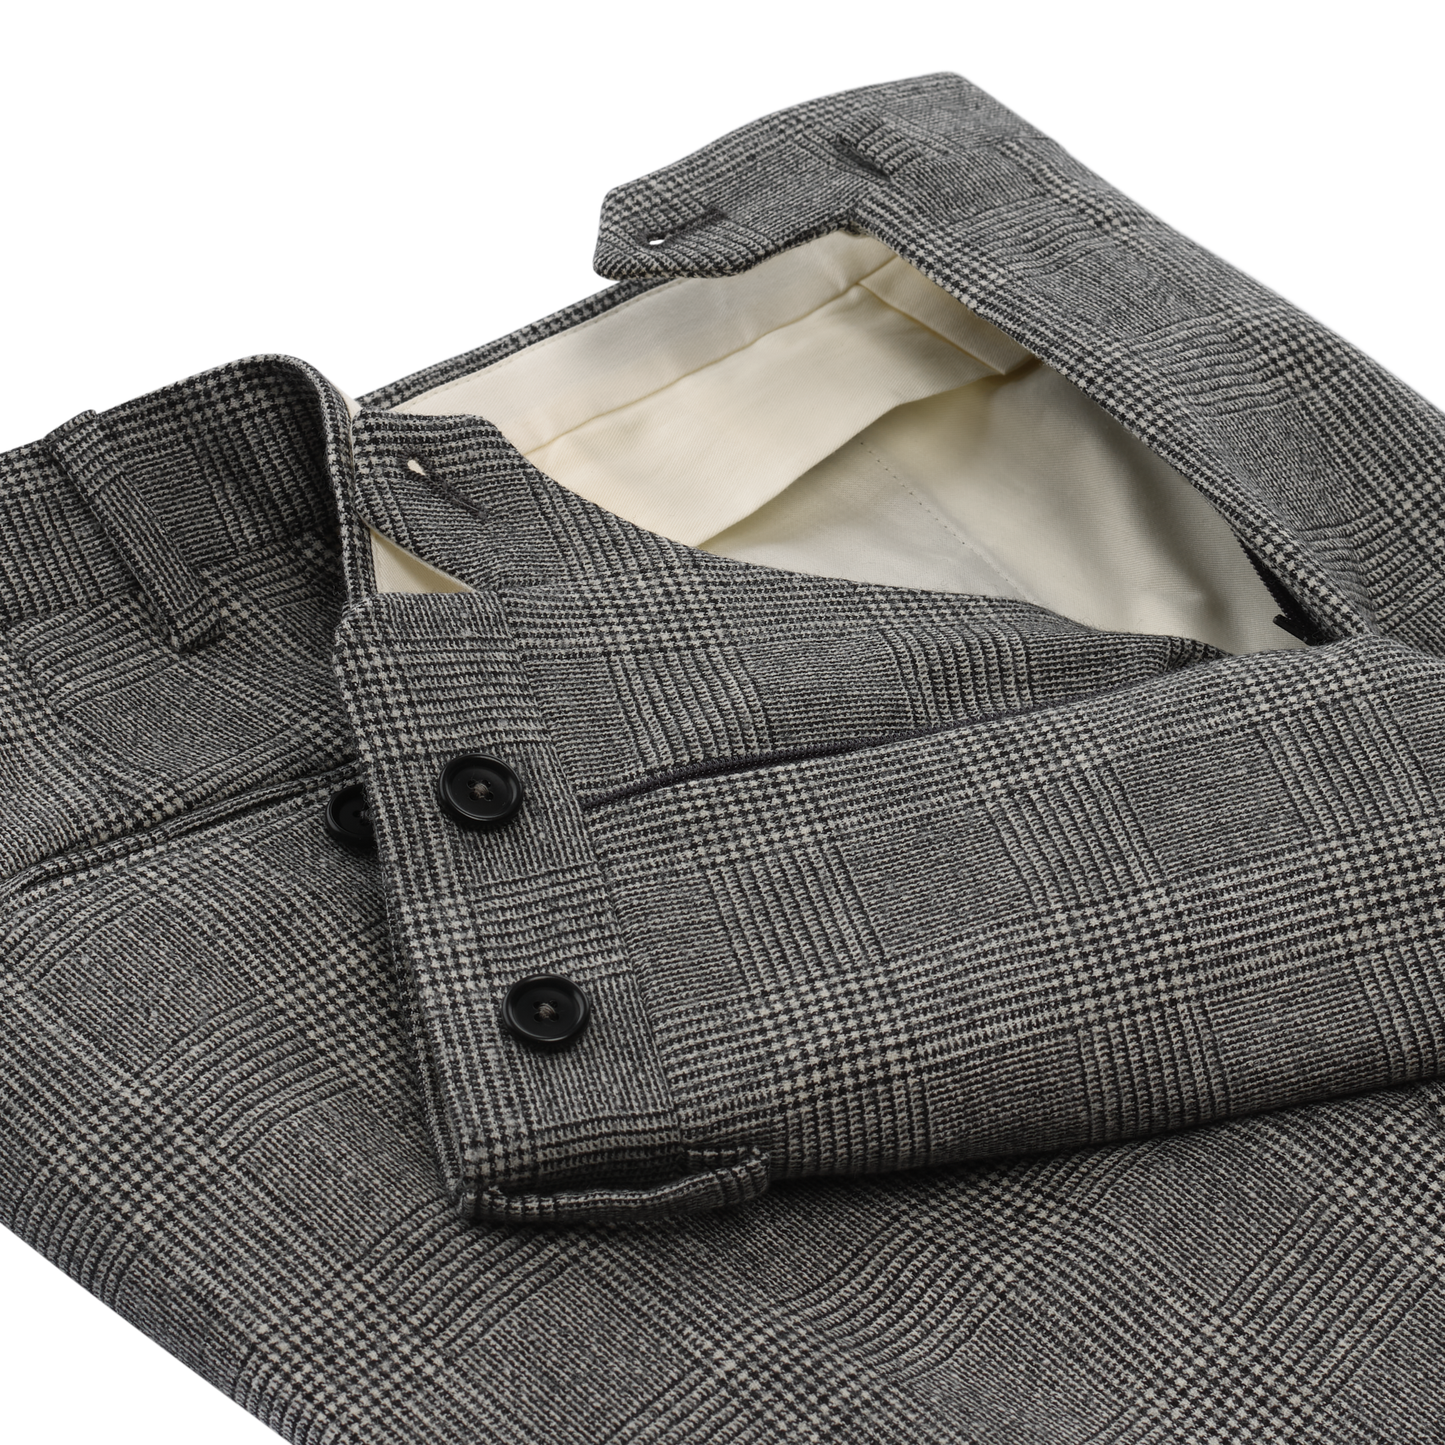 De Petrillo Single-Breasted Prince of Wales Virgin Wool Suit in Grey. Exclusively Made for Sartale - SARTALE